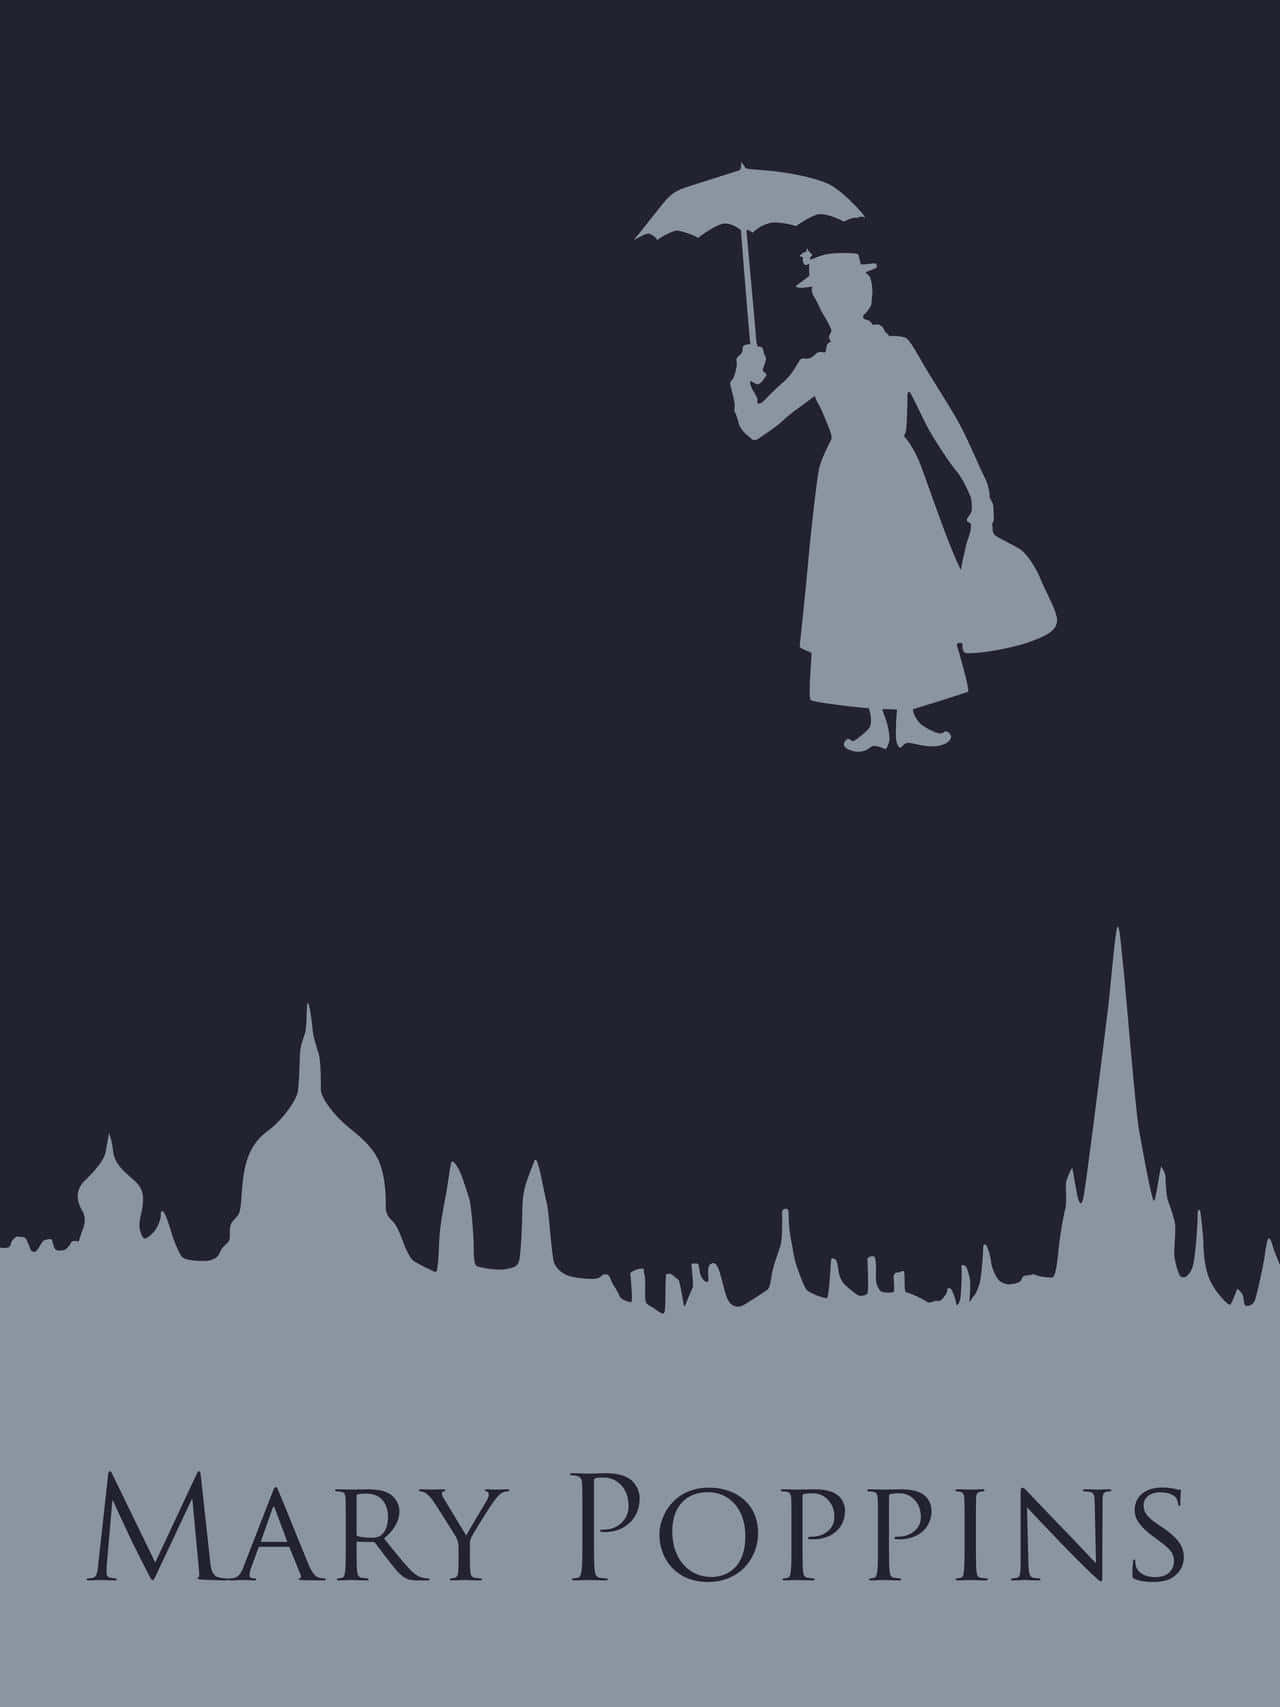 Caption: Mary Poppins Smiling With Her Magical Umbrella Wallpaper